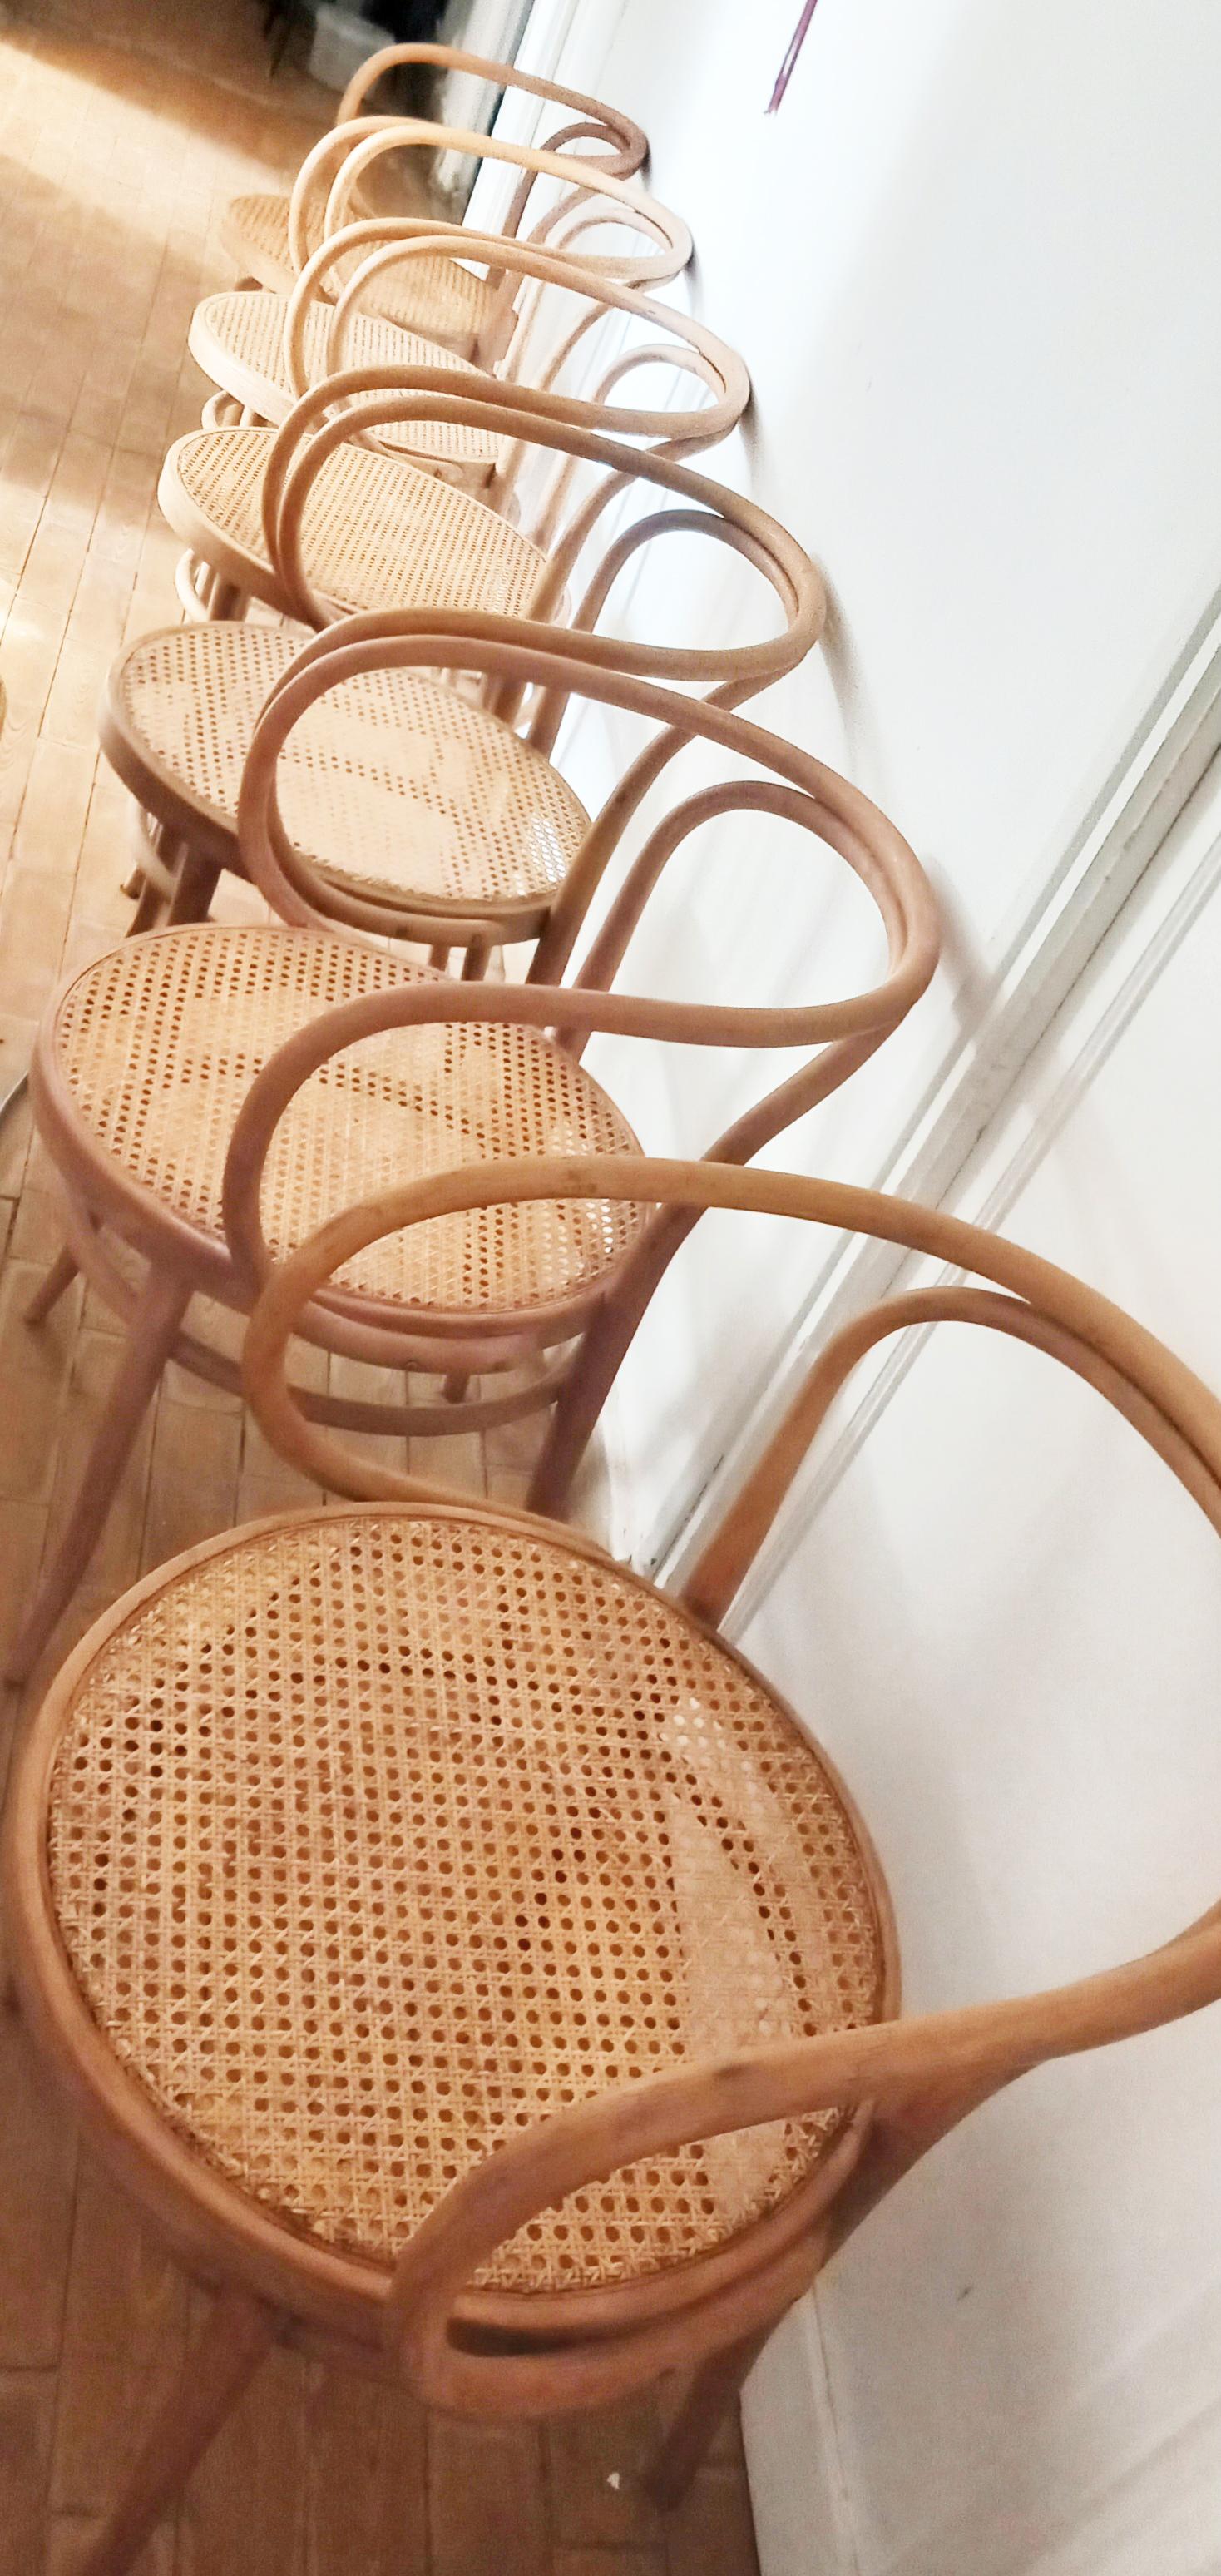 Mid-Century Modern Thonet 209 Cane Bentwood Chairs After Thonet 209, 1950s For Sale